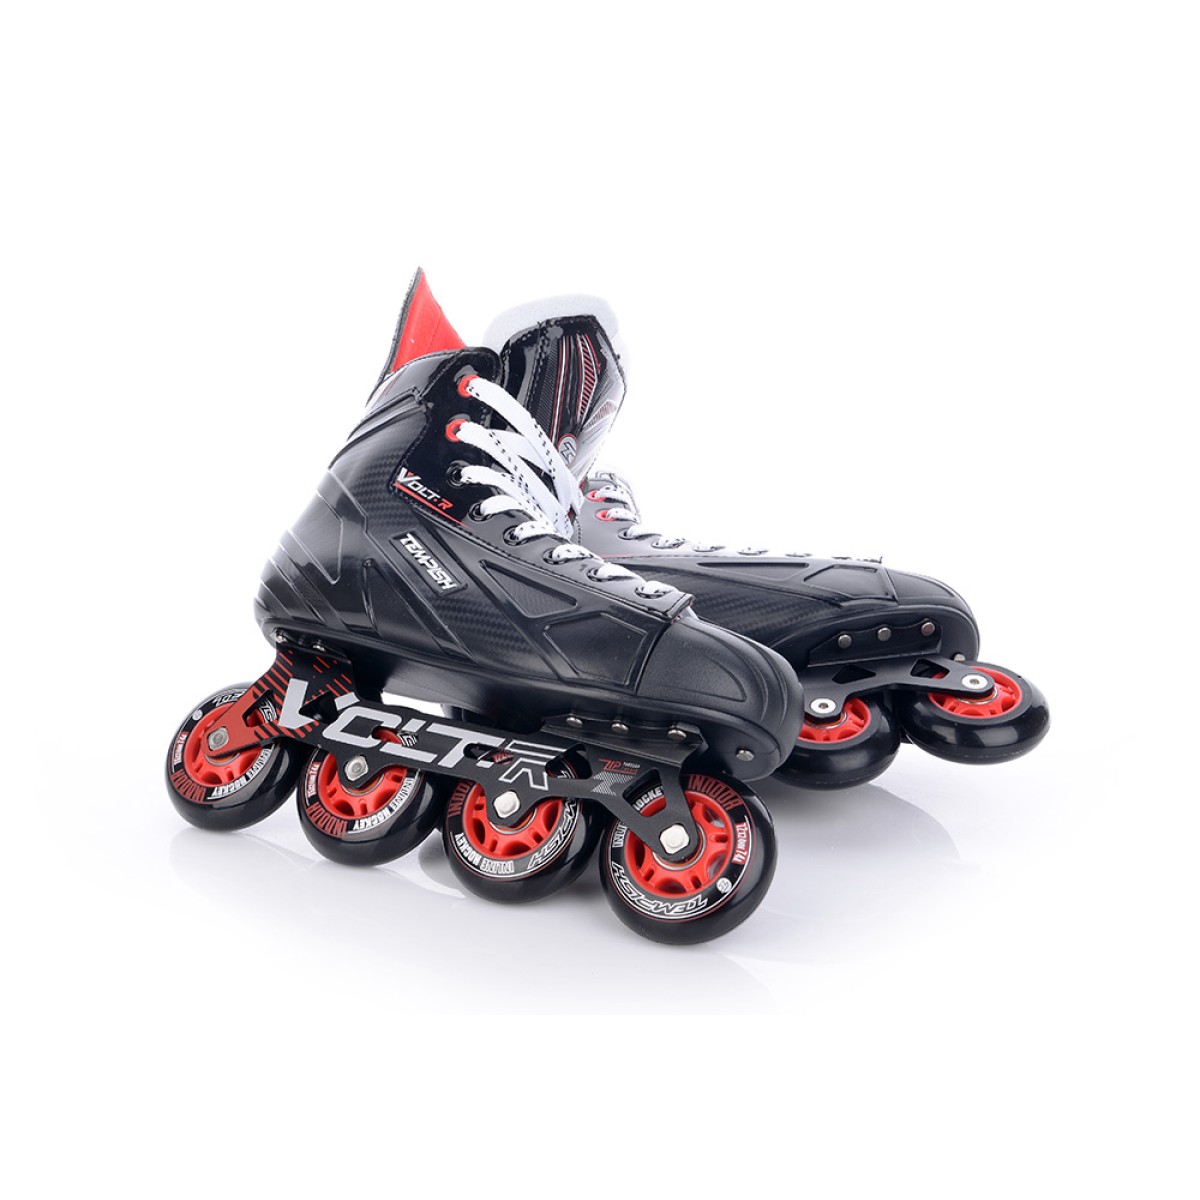 VOLT-R skates for IN-LINE hockey TEMPISH - view 12